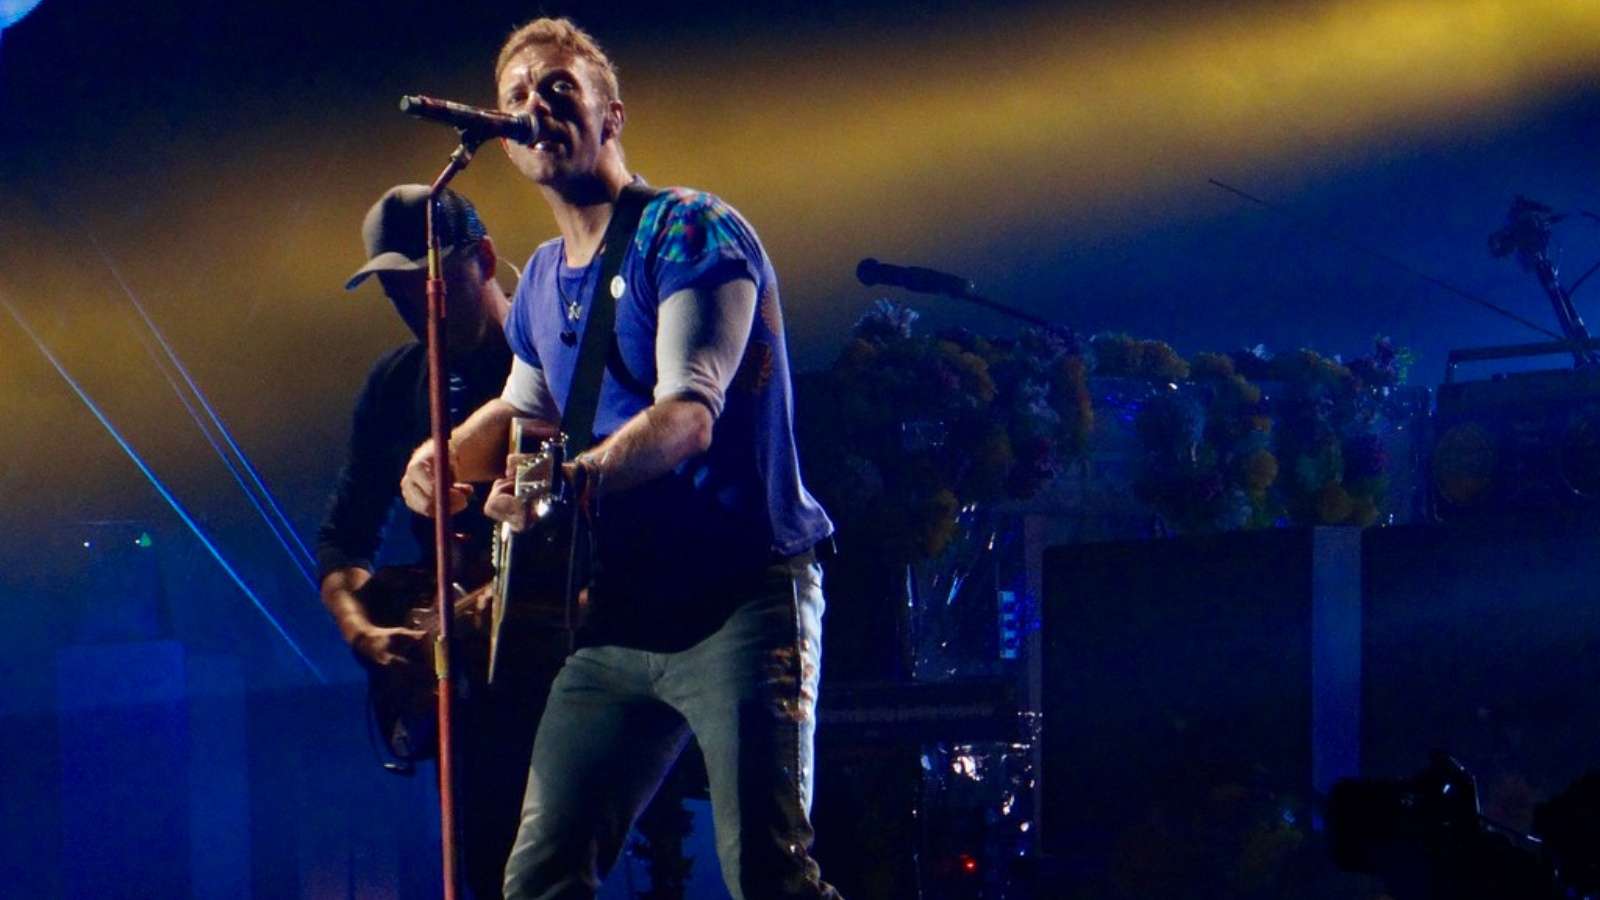 Coldplay's Chris Martin with a guitar playing at a concert onstage